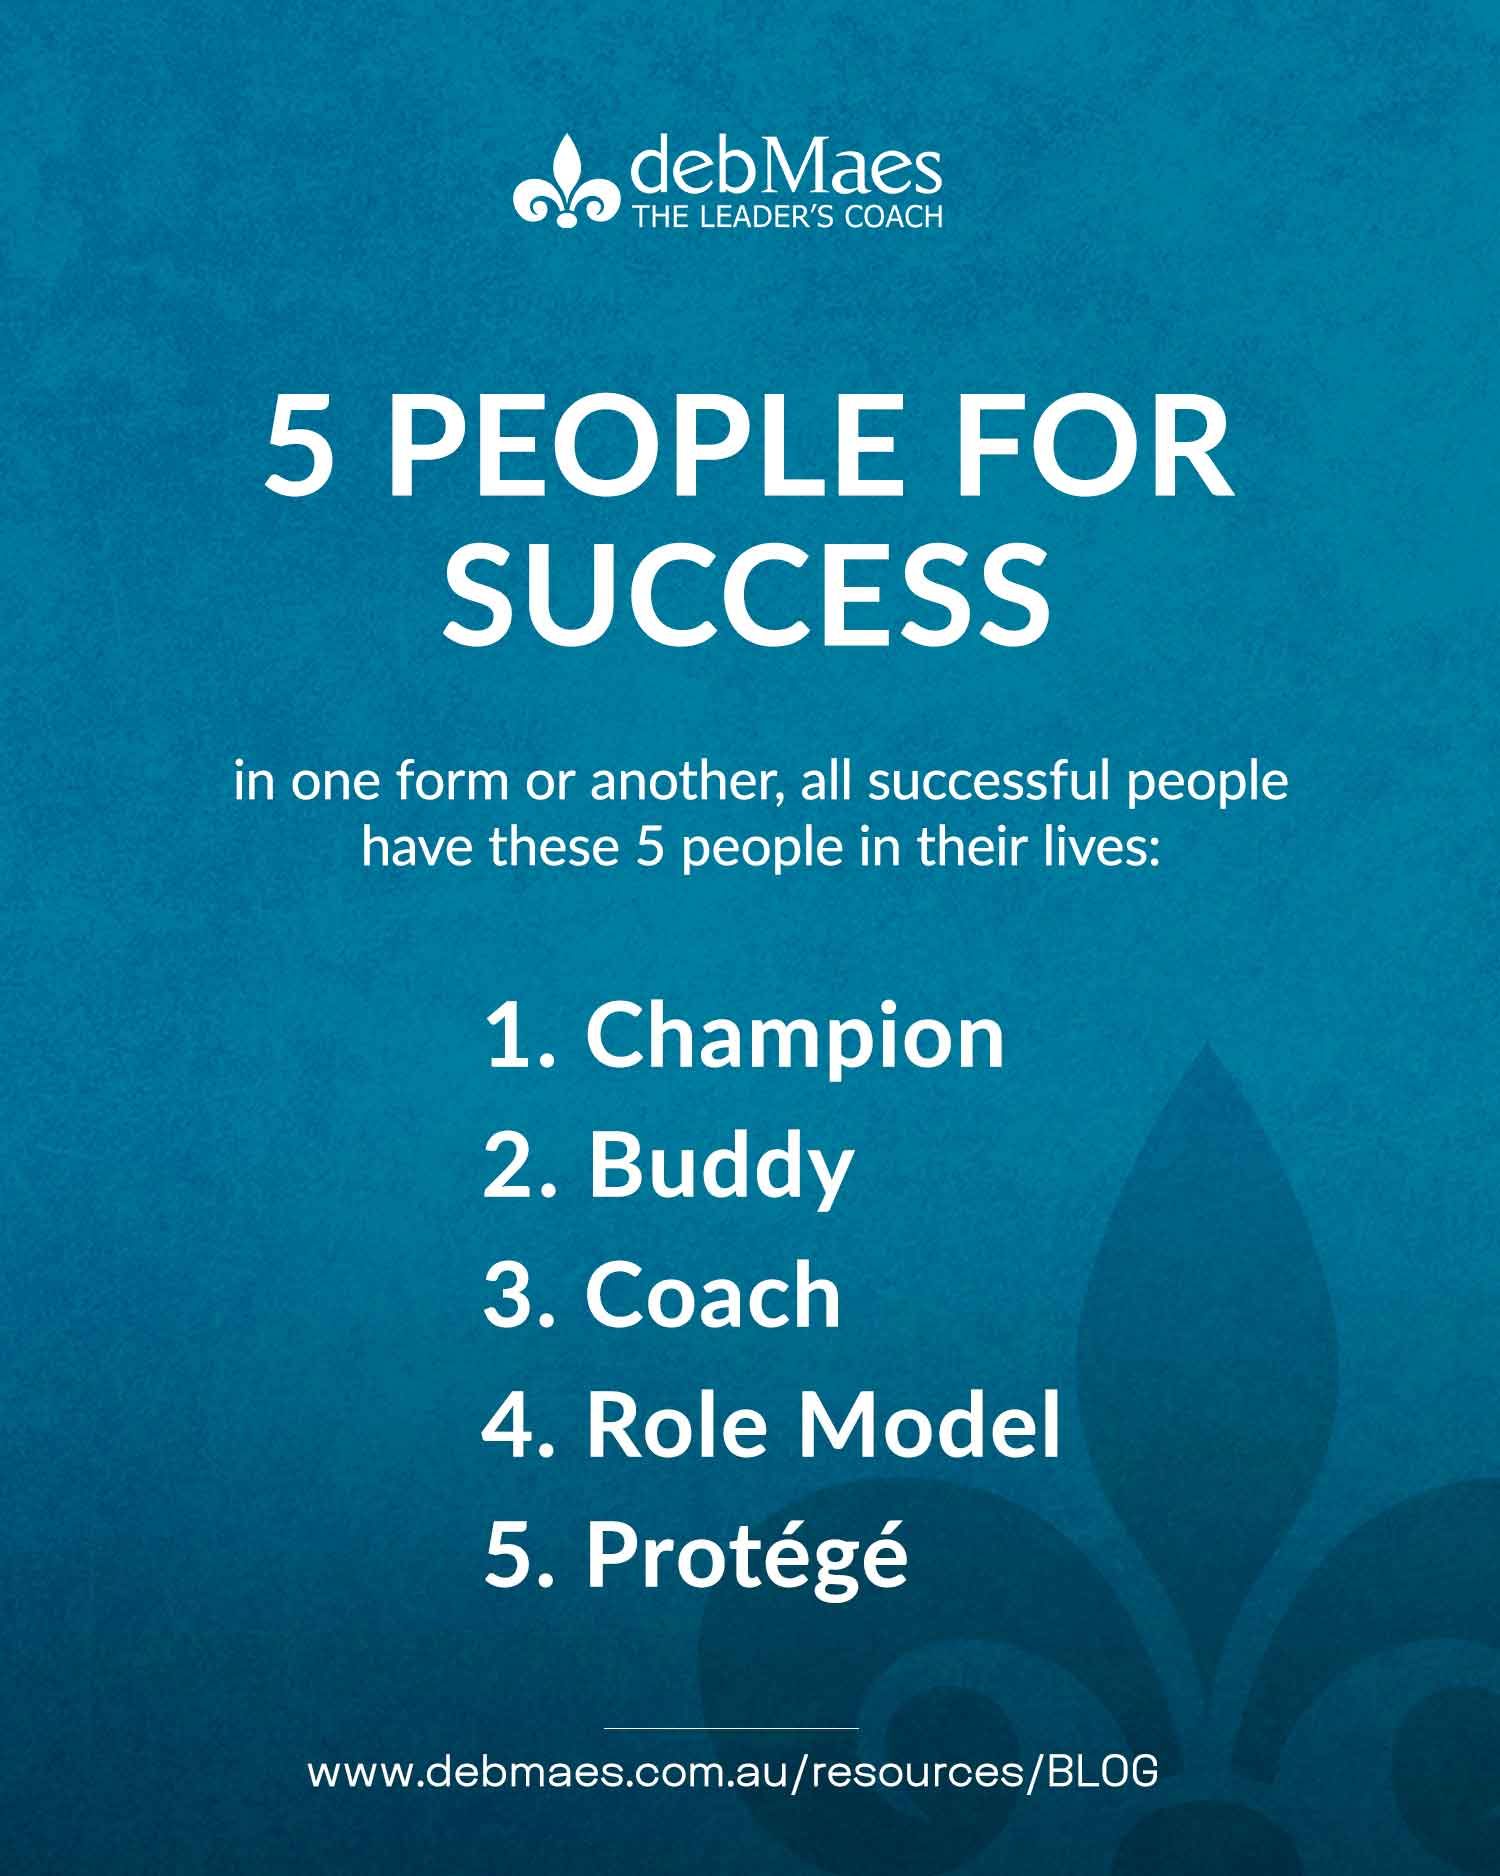 5 Types of People for Success